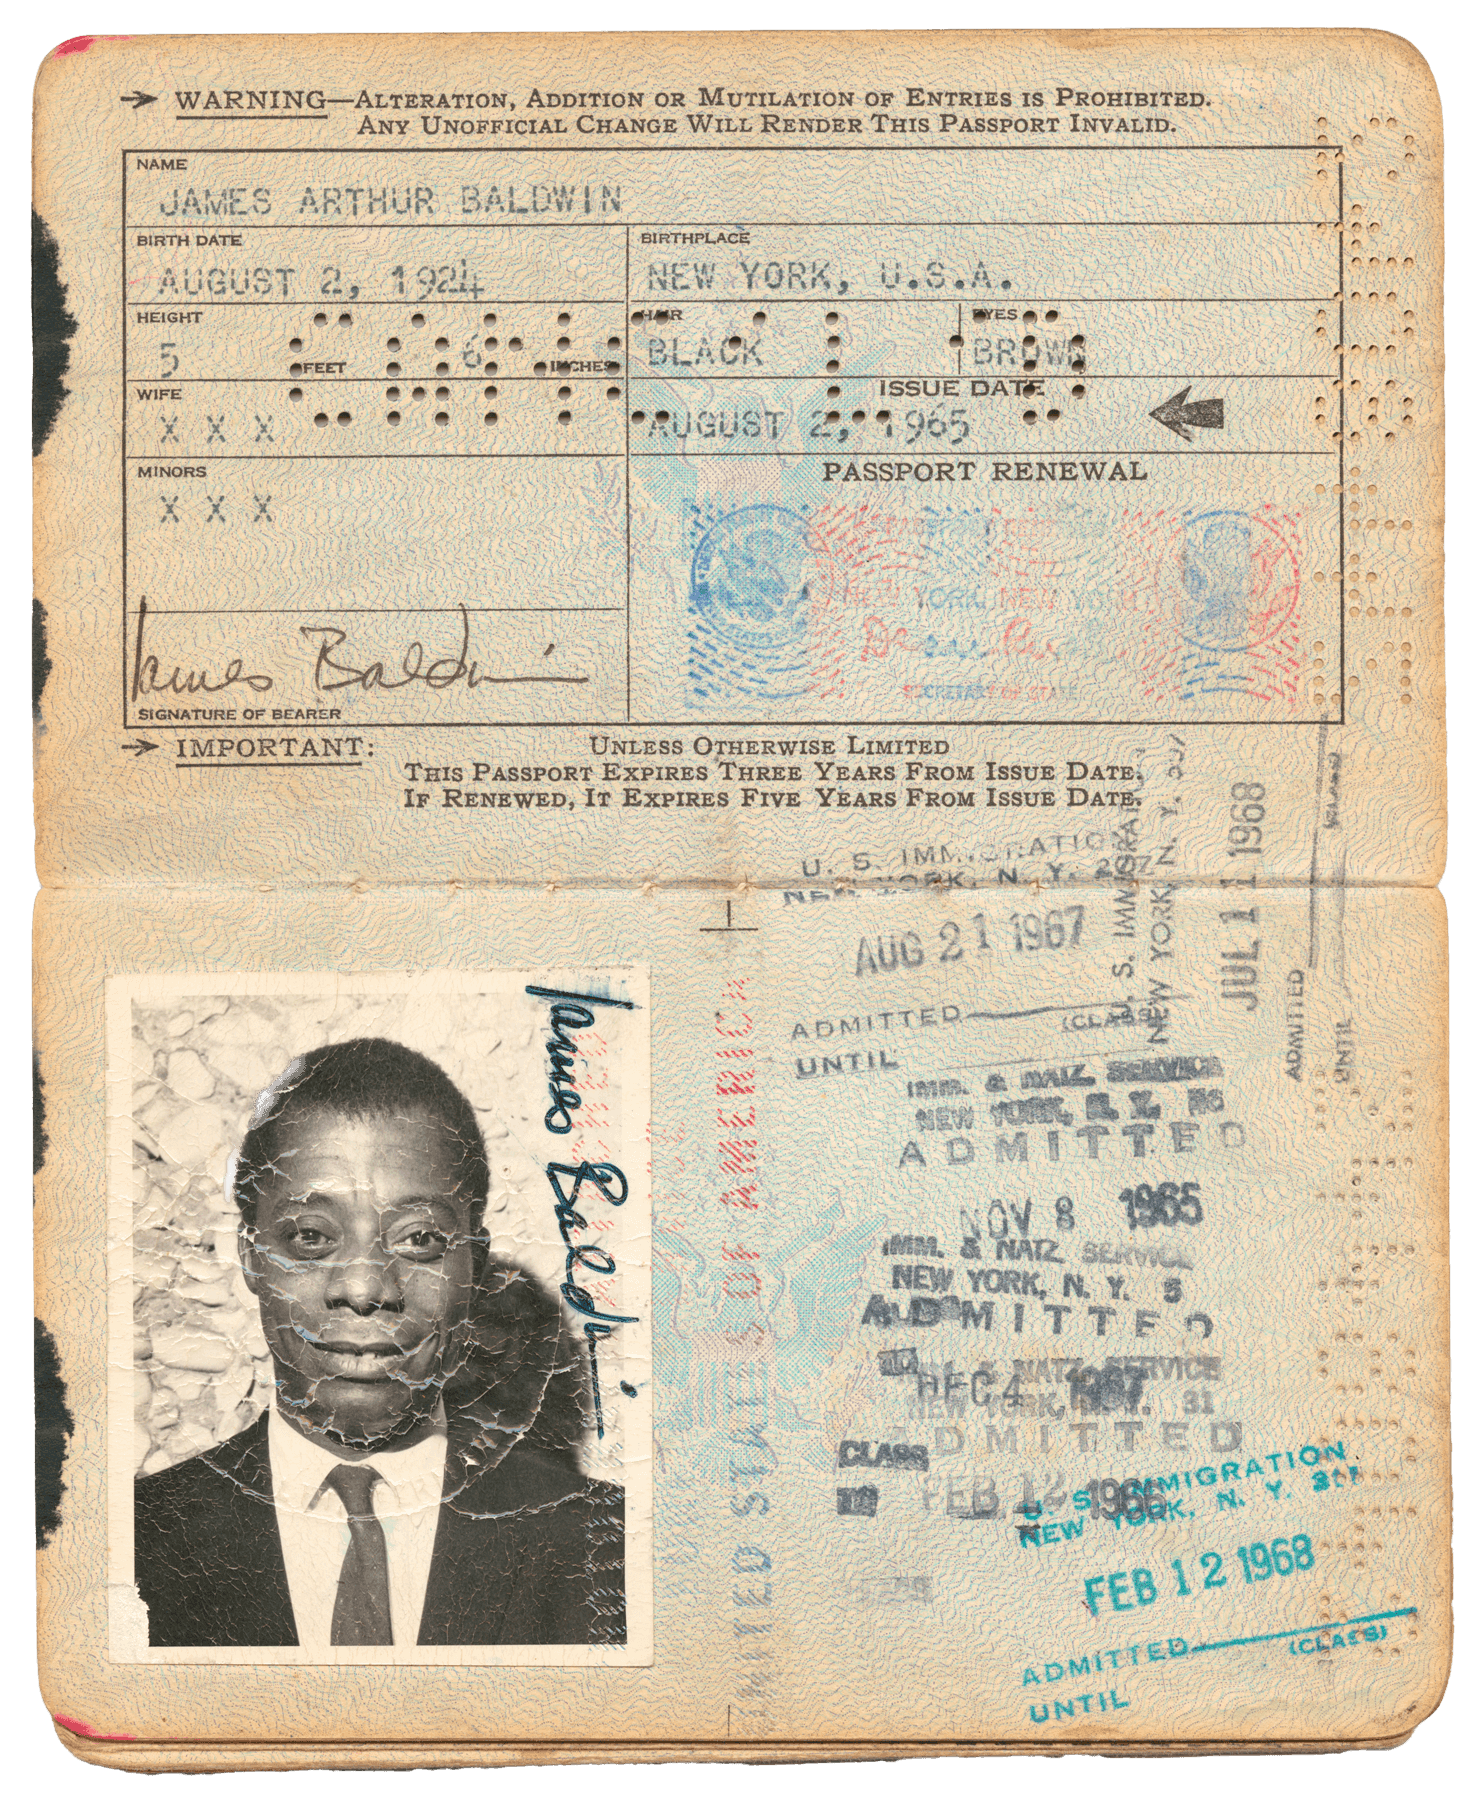 A United States passport issued to James Arthur Baldwin on August 2, 1965. Baldwin's photograph is in the lower left corner.